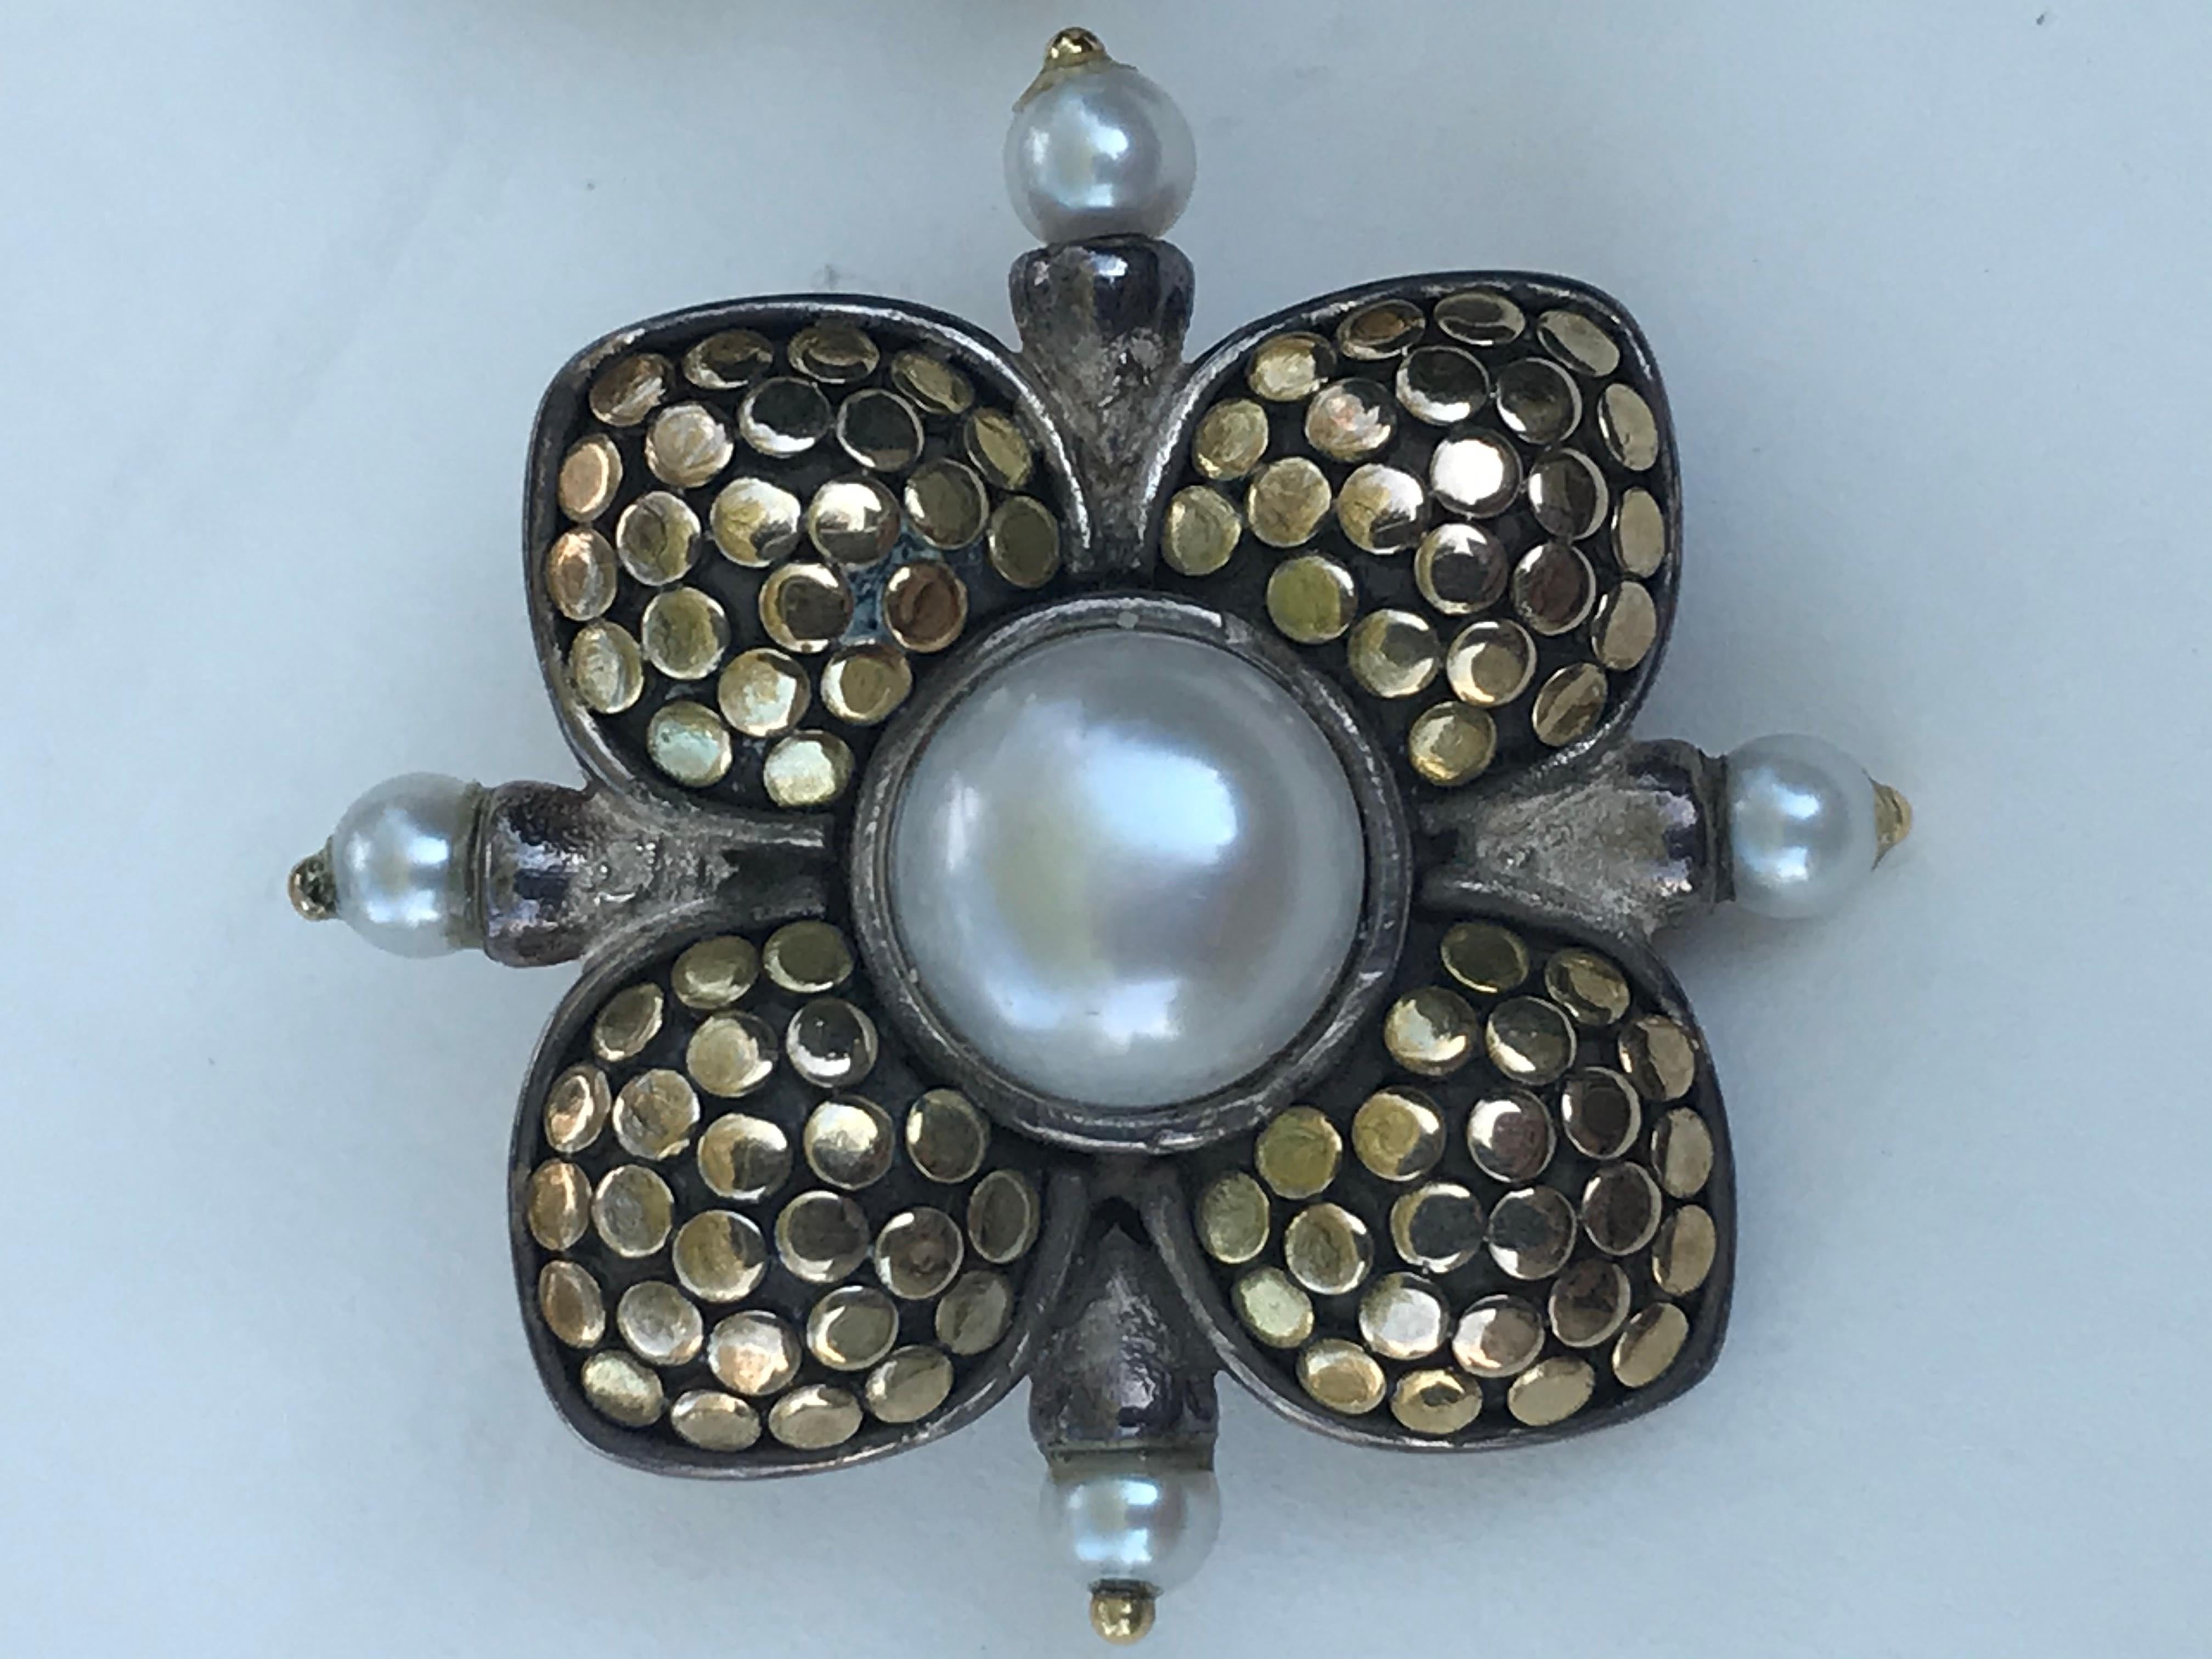 These beautiful pearl earrings from John Hardy are an awesome addition to any jewelry box.
John Hardy
Sterling silver with 18 karat yellow gold accents in flower design
10 total pearls
2 center mabe pearls are approximately 8mm round
8 round small